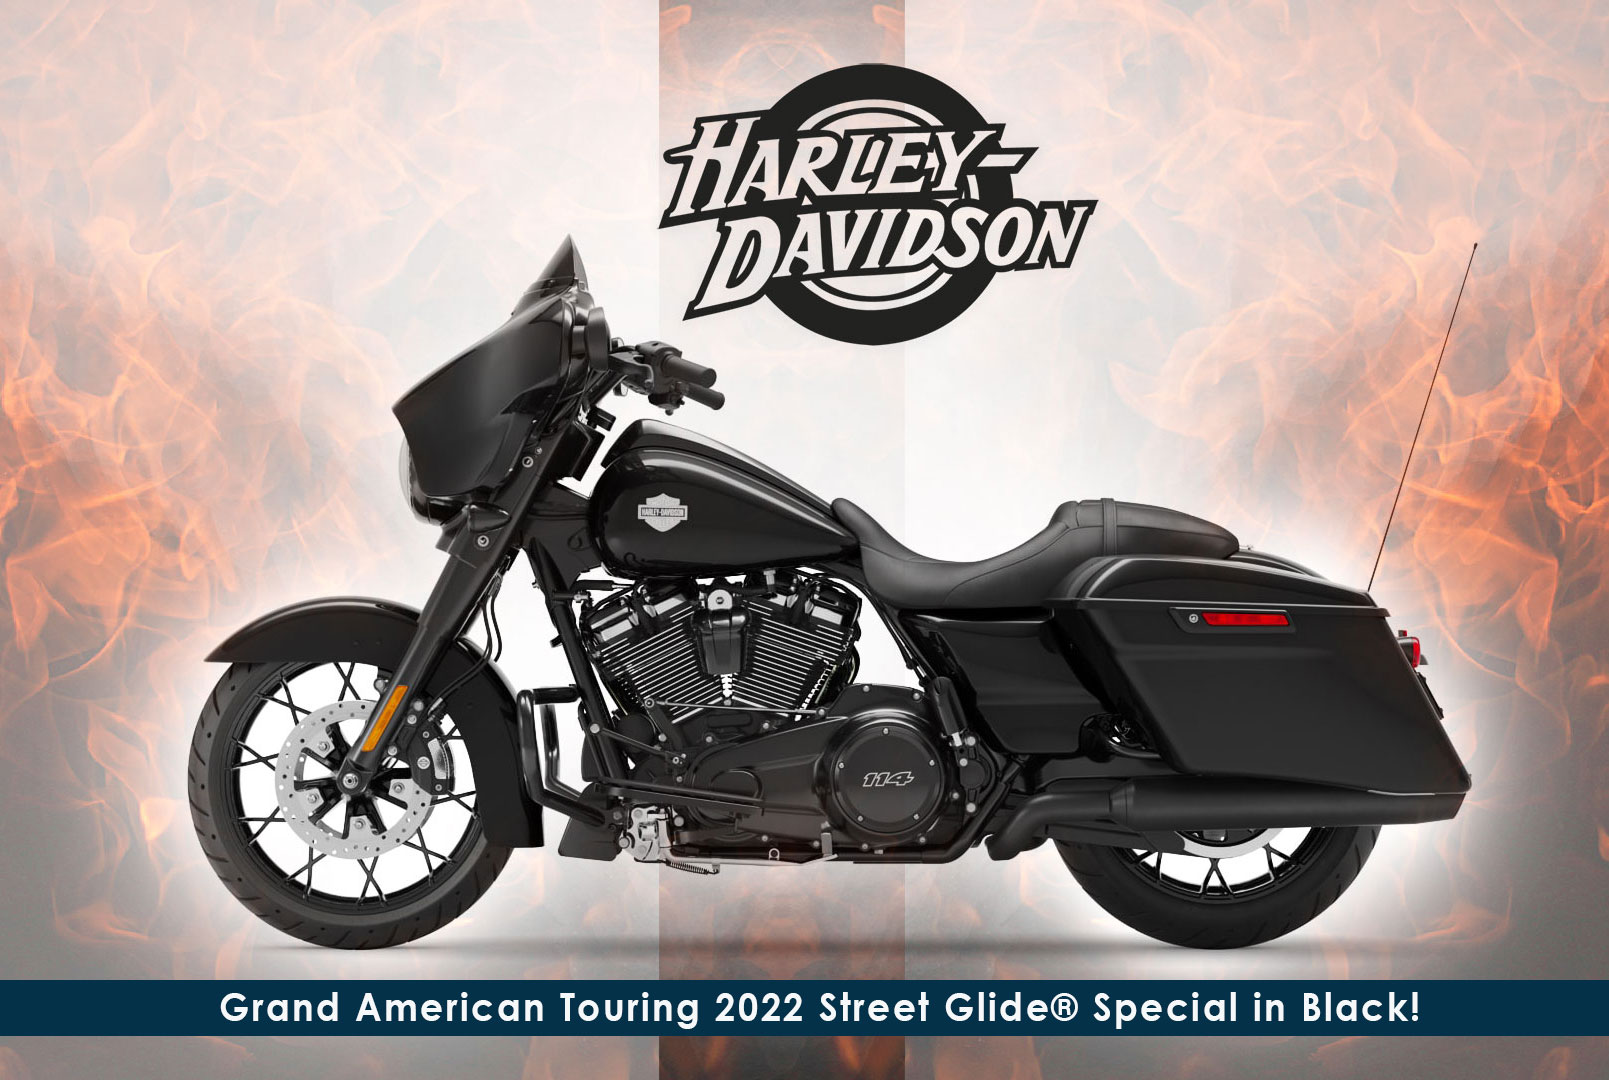 Fun Facts About Harley Davidson You’ll Want to Know!